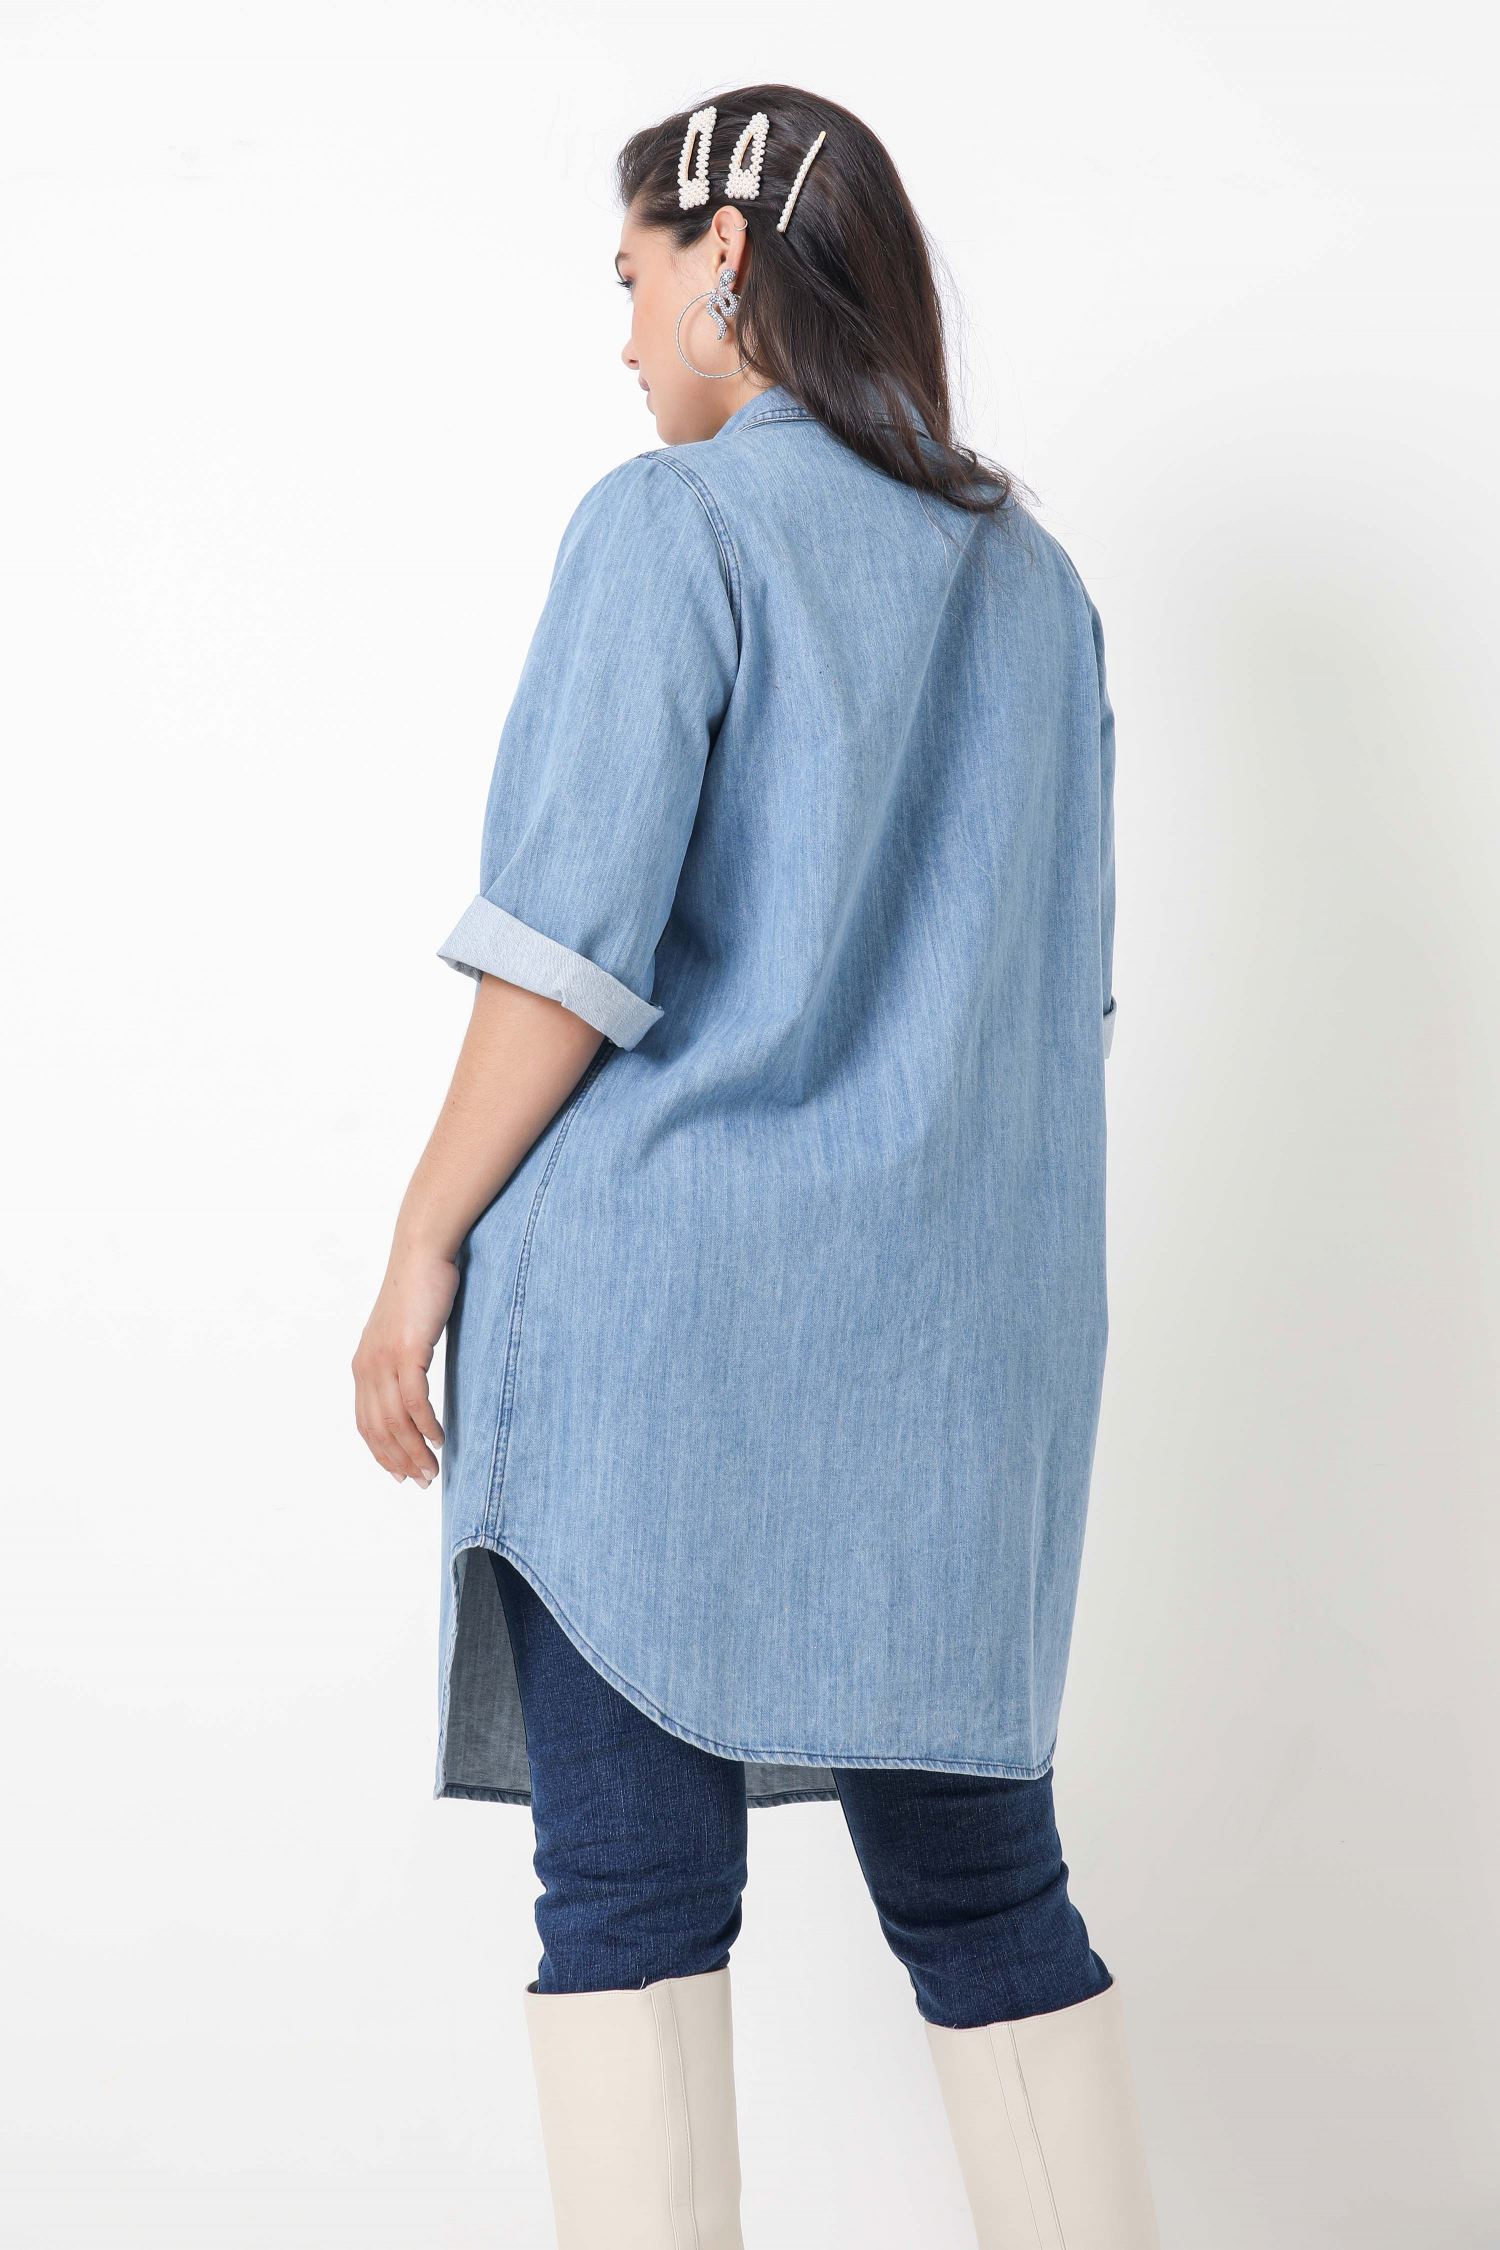 long jeans shirt with pearl